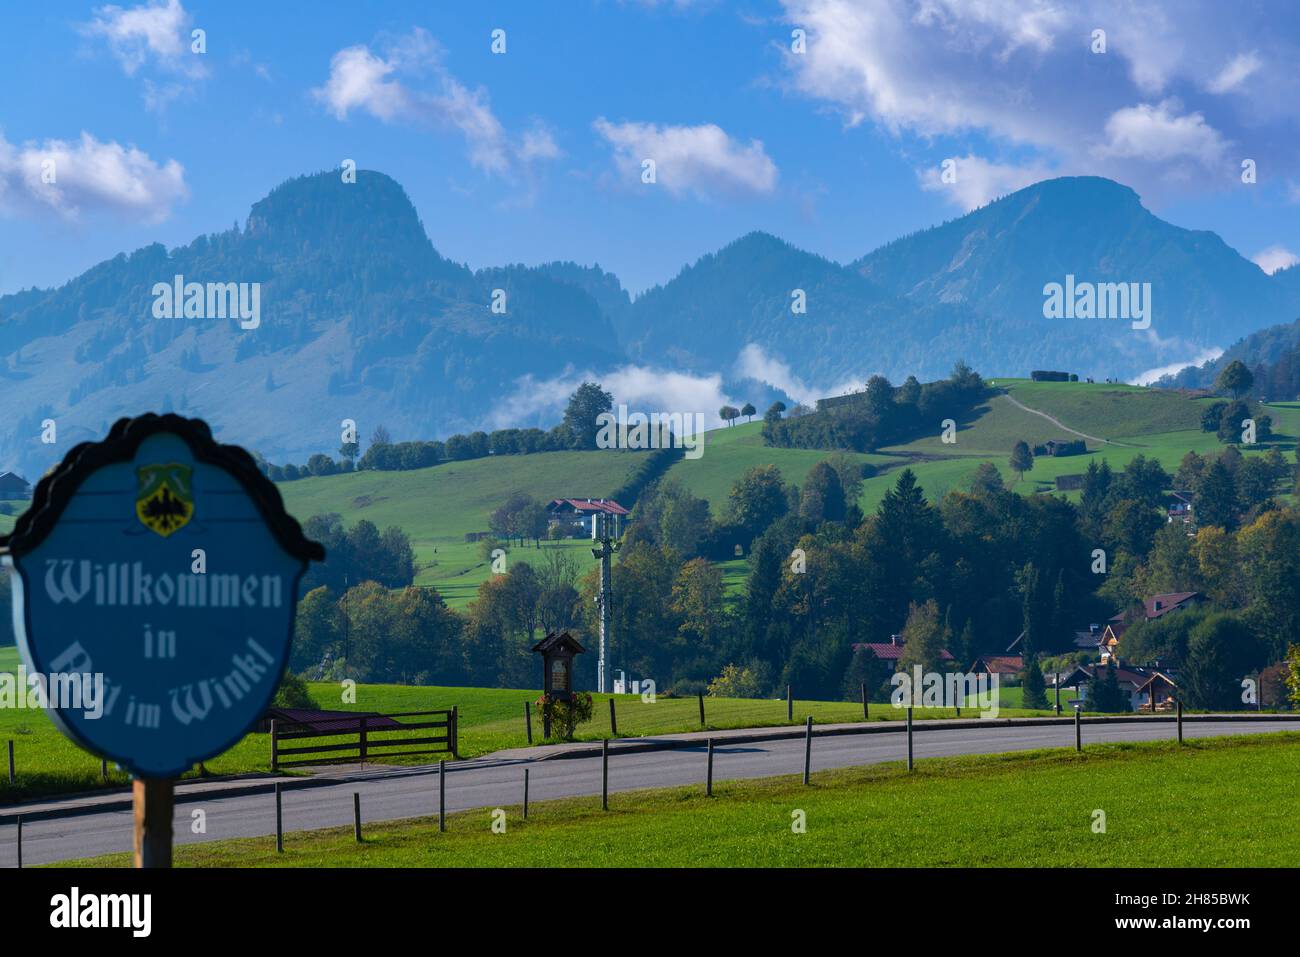 Maedows and pastures in the outskirts of Reit village, Reit im Winkle, Chiemgau region, Upper Bavaria, Southern Germany, Europe Stock Photo